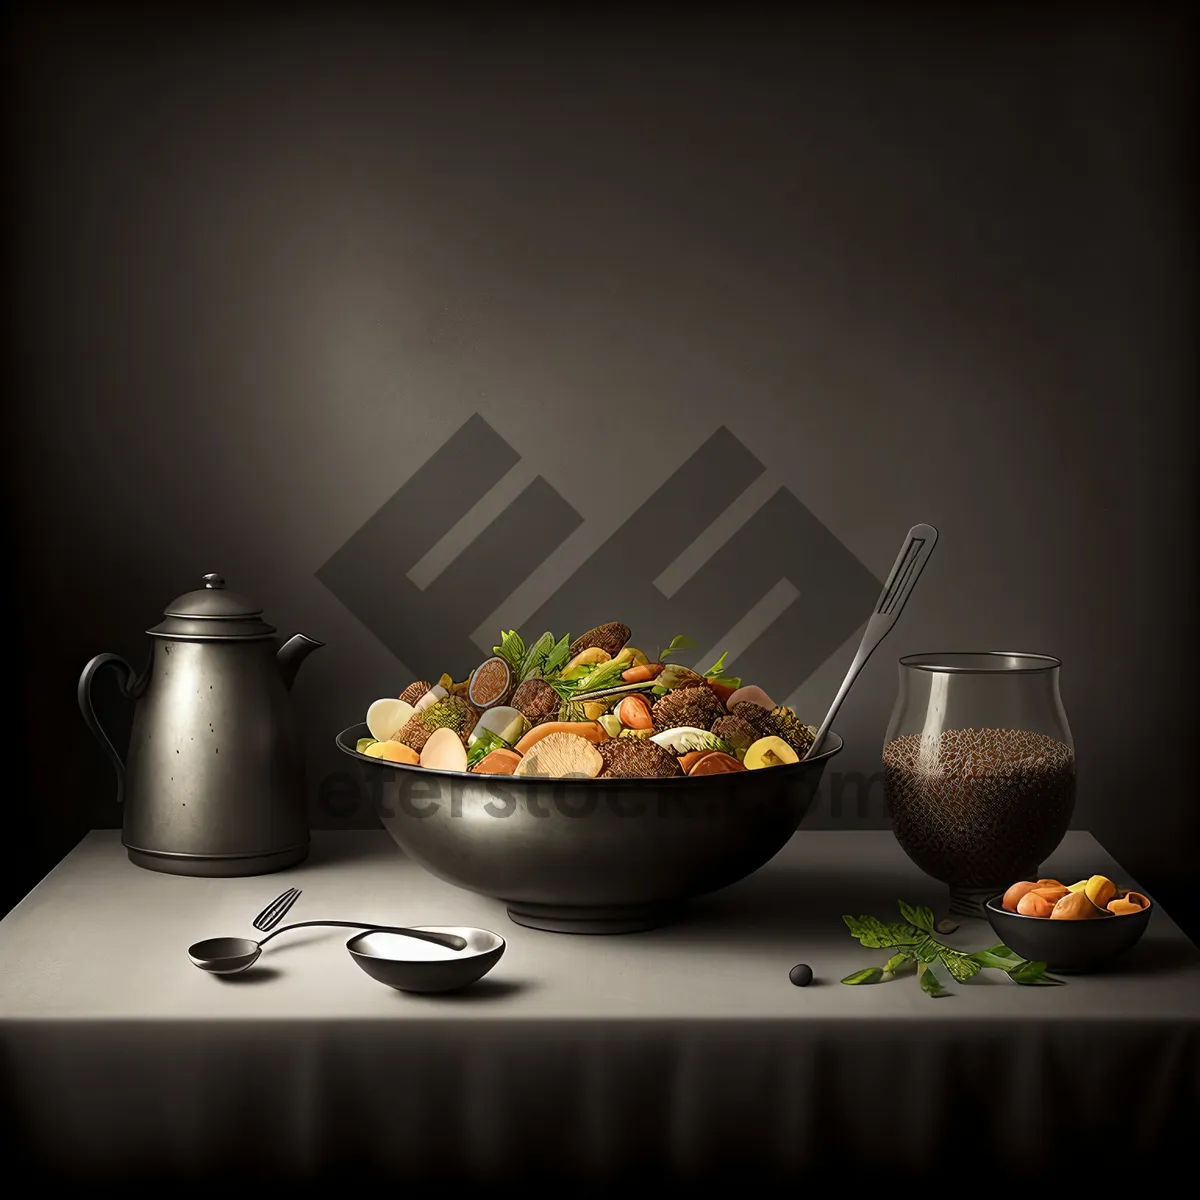 Picture of Black Candlelit Cooking: Wok, Pan, Food